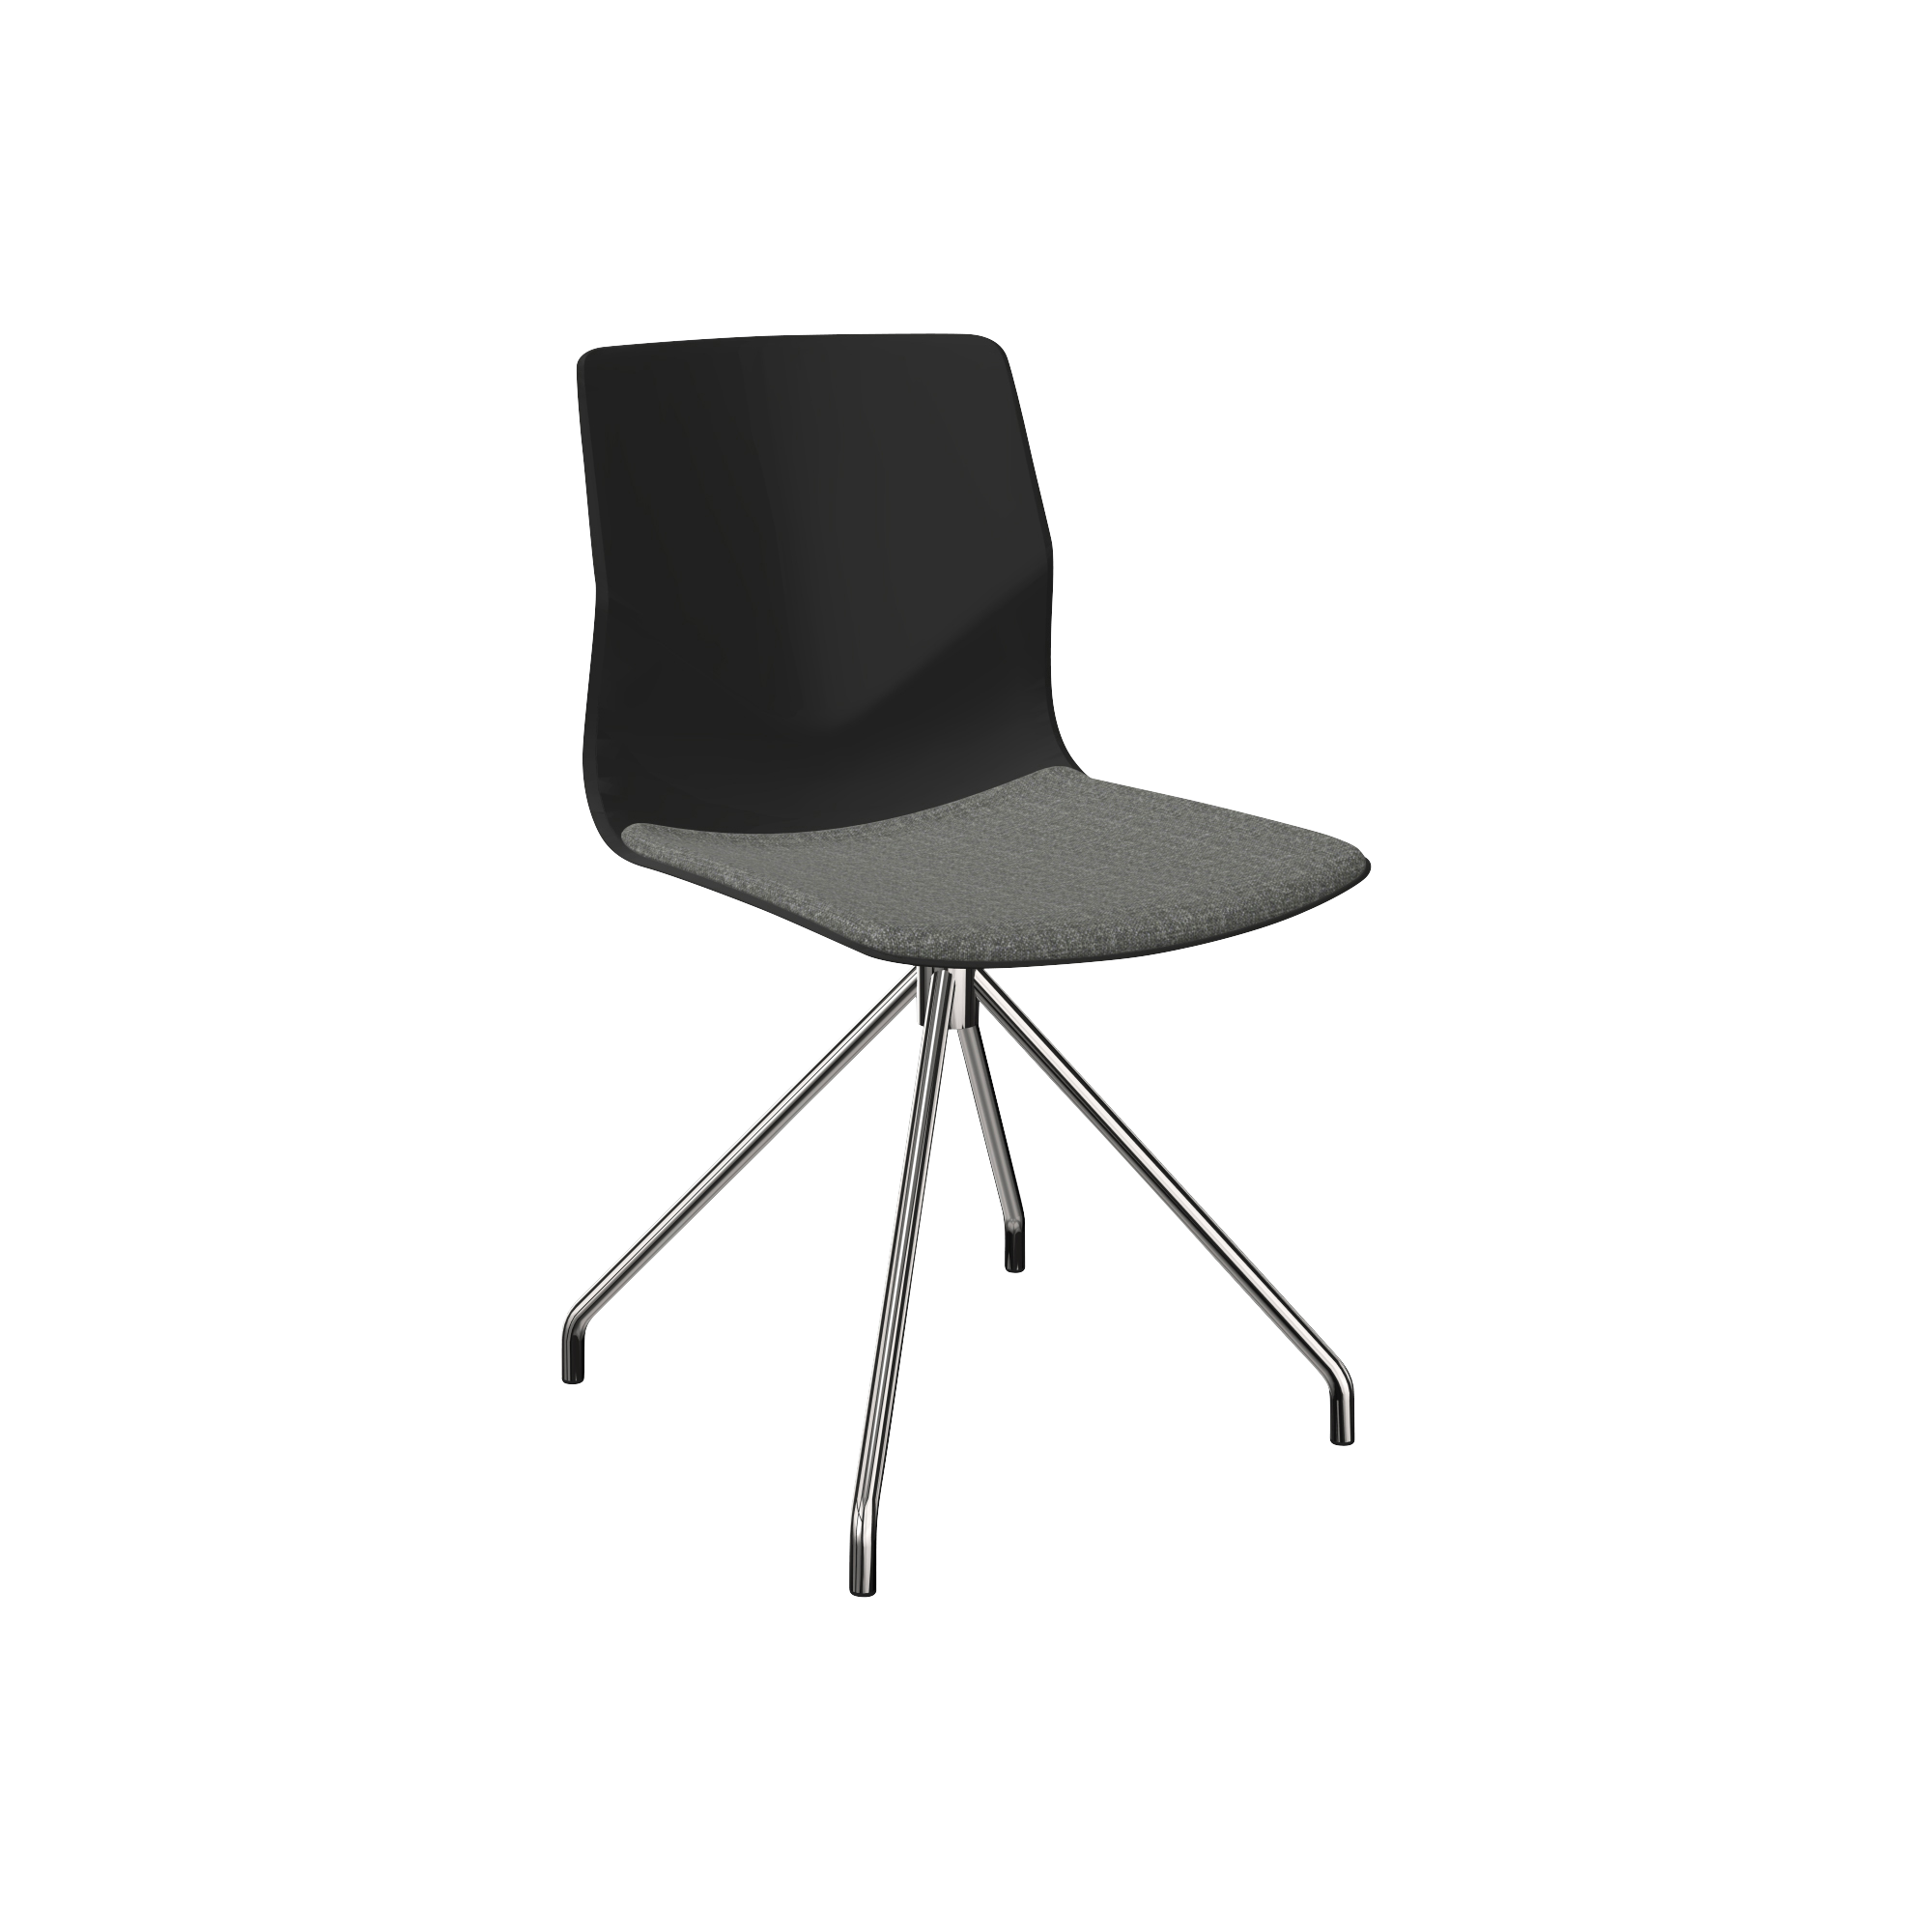 A black and grey chair